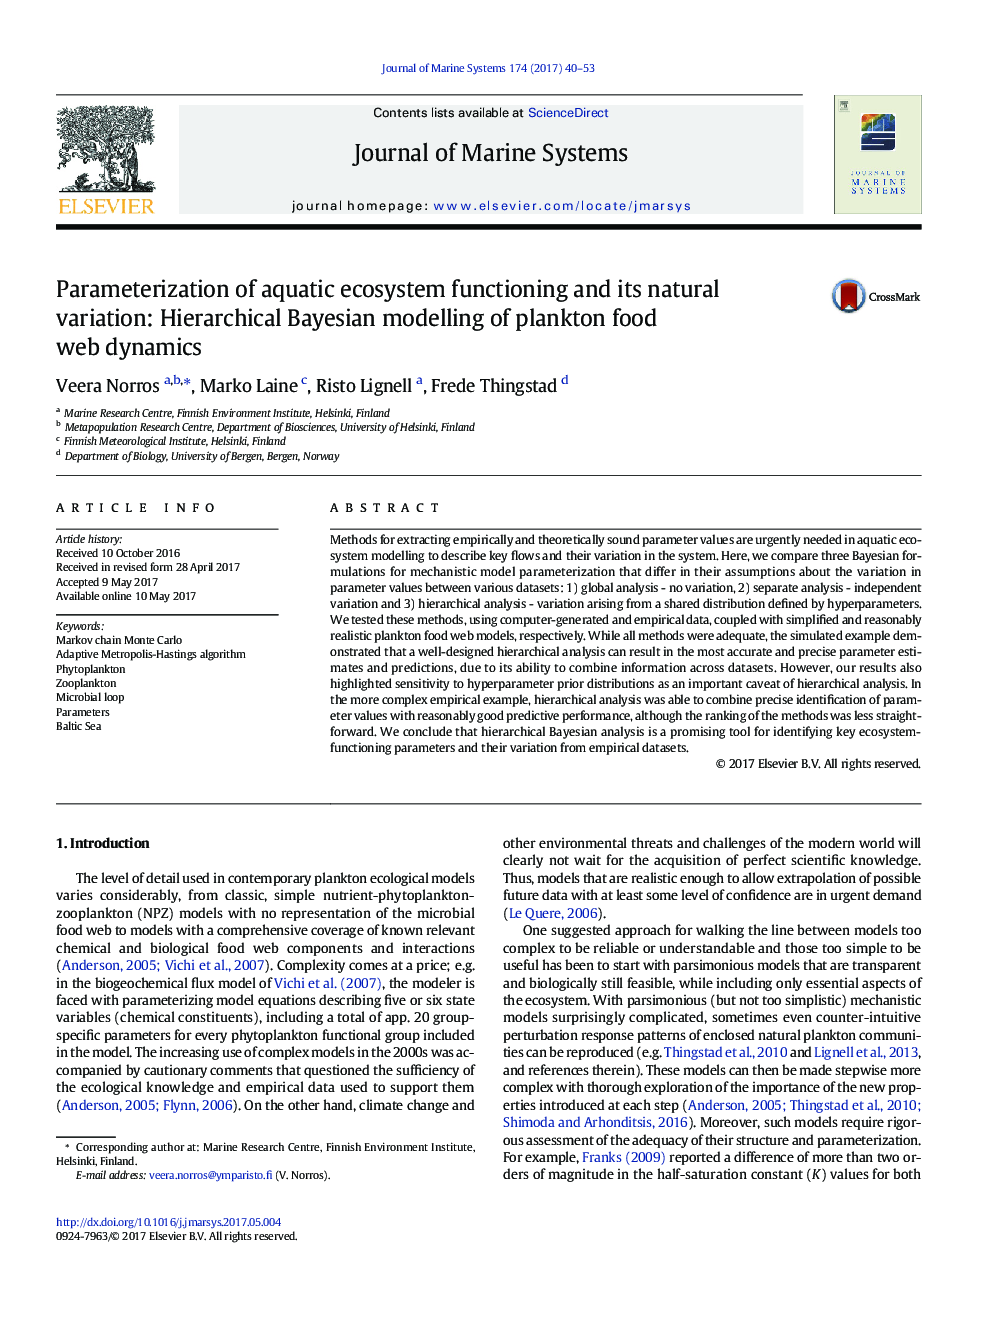 Parameterization of aquatic ecosystem functioning and its natural variation: Hierarchical Bayesian modelling of plankton food web dynamics